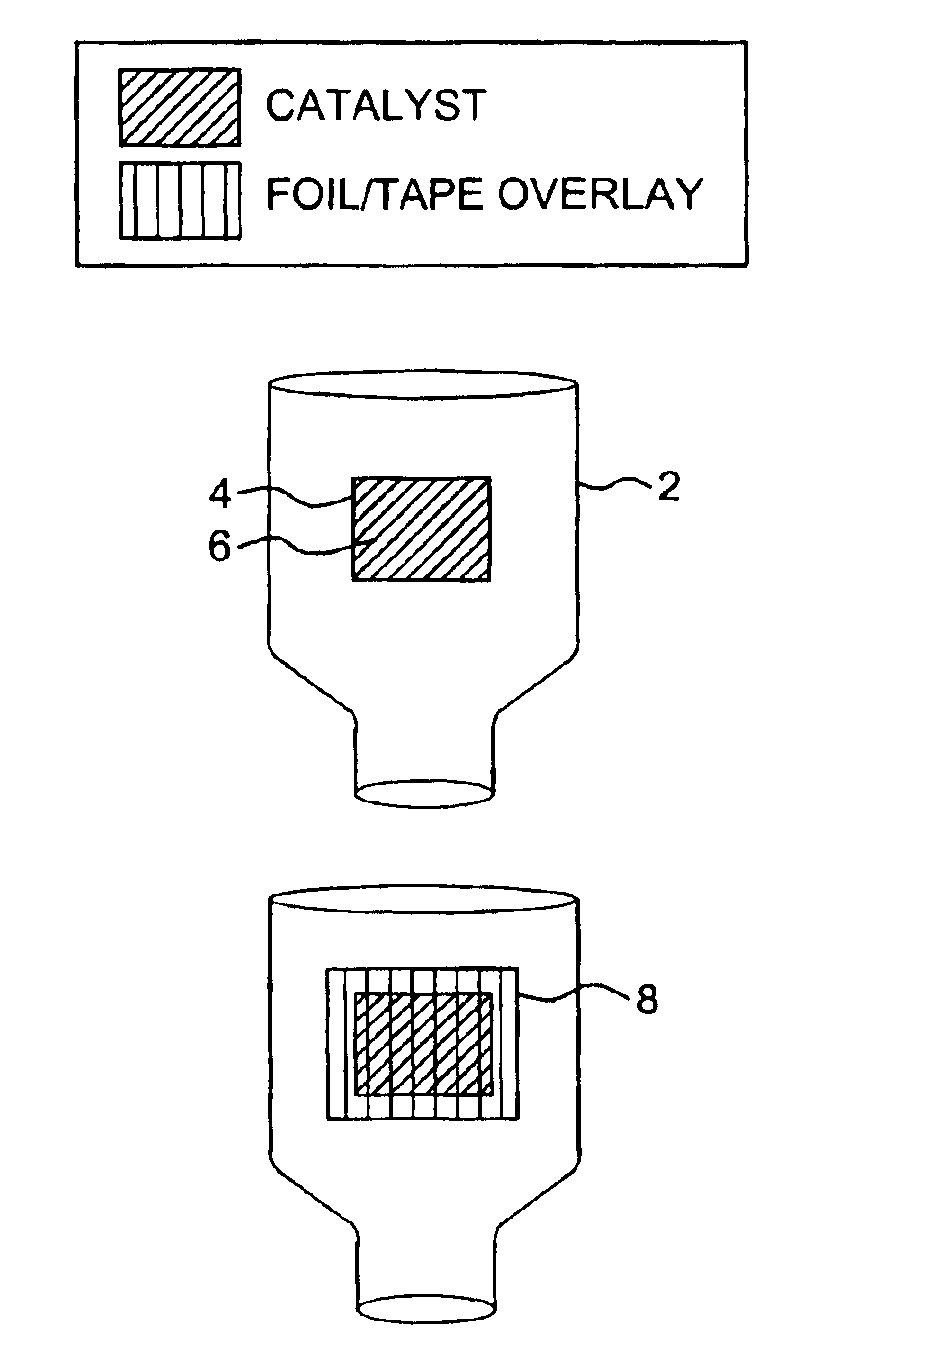 System and method for safe removal/oxidative decomposition of fuel from a fuel container